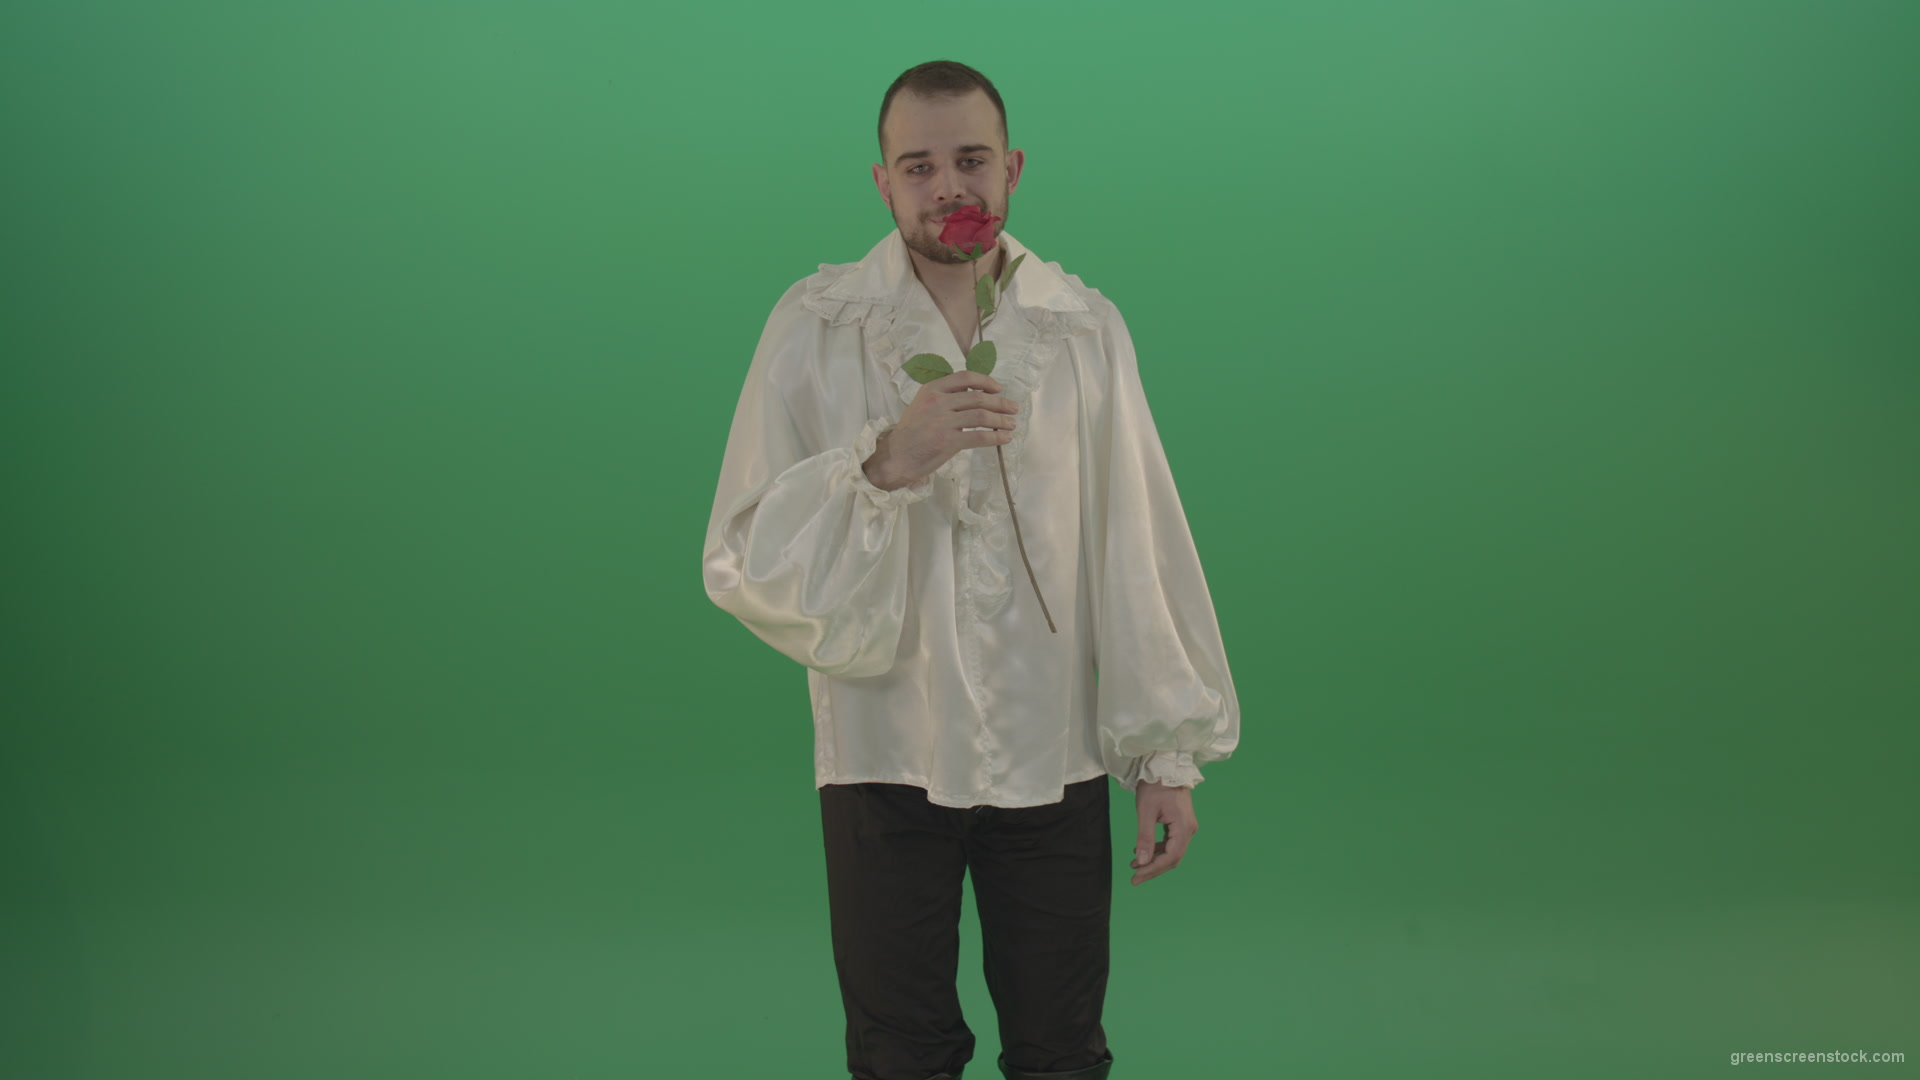 Glancing-at-the-red-flower-the-guy-gives-love-rose-to-camera-isolated-on-green-screen_005 Green Screen Stock